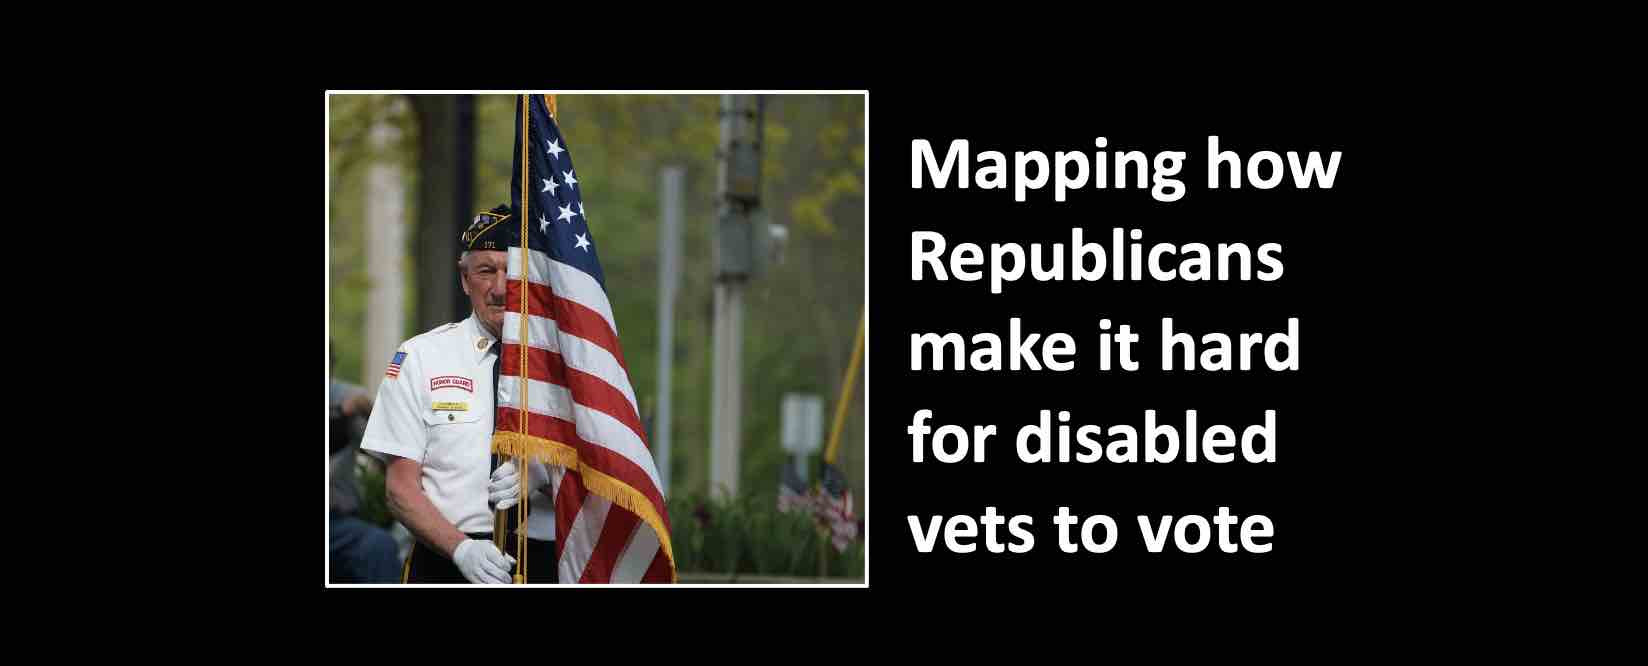 Republicans make it hard for veterans, disabled and seniors to vote